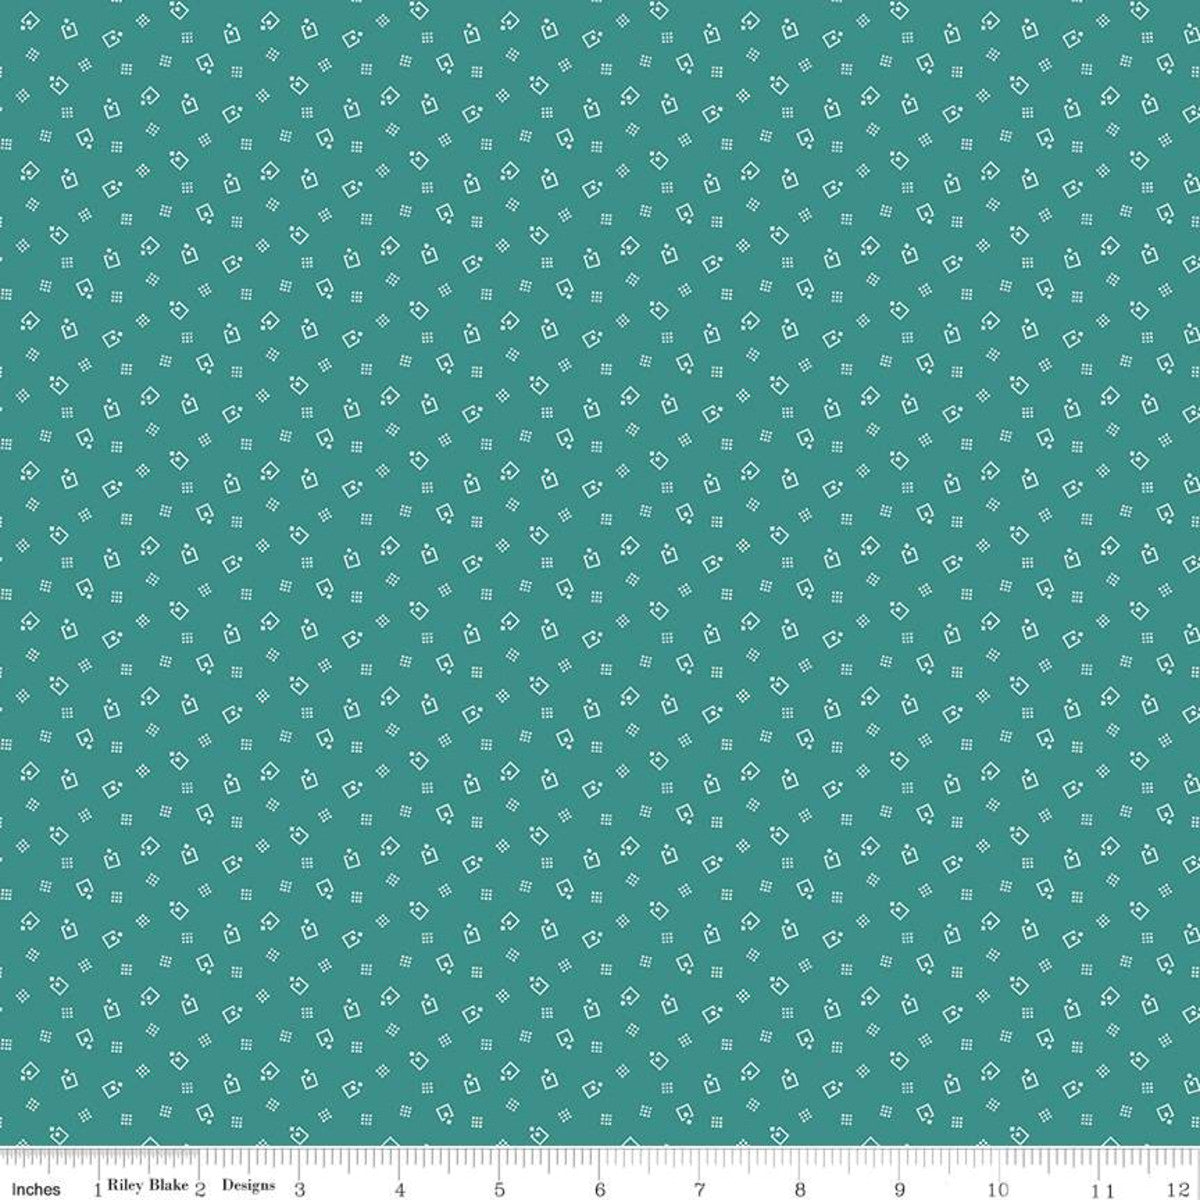 Fabric, Prairie by Lori Holt MERCANTILE TEAL (by the yard)